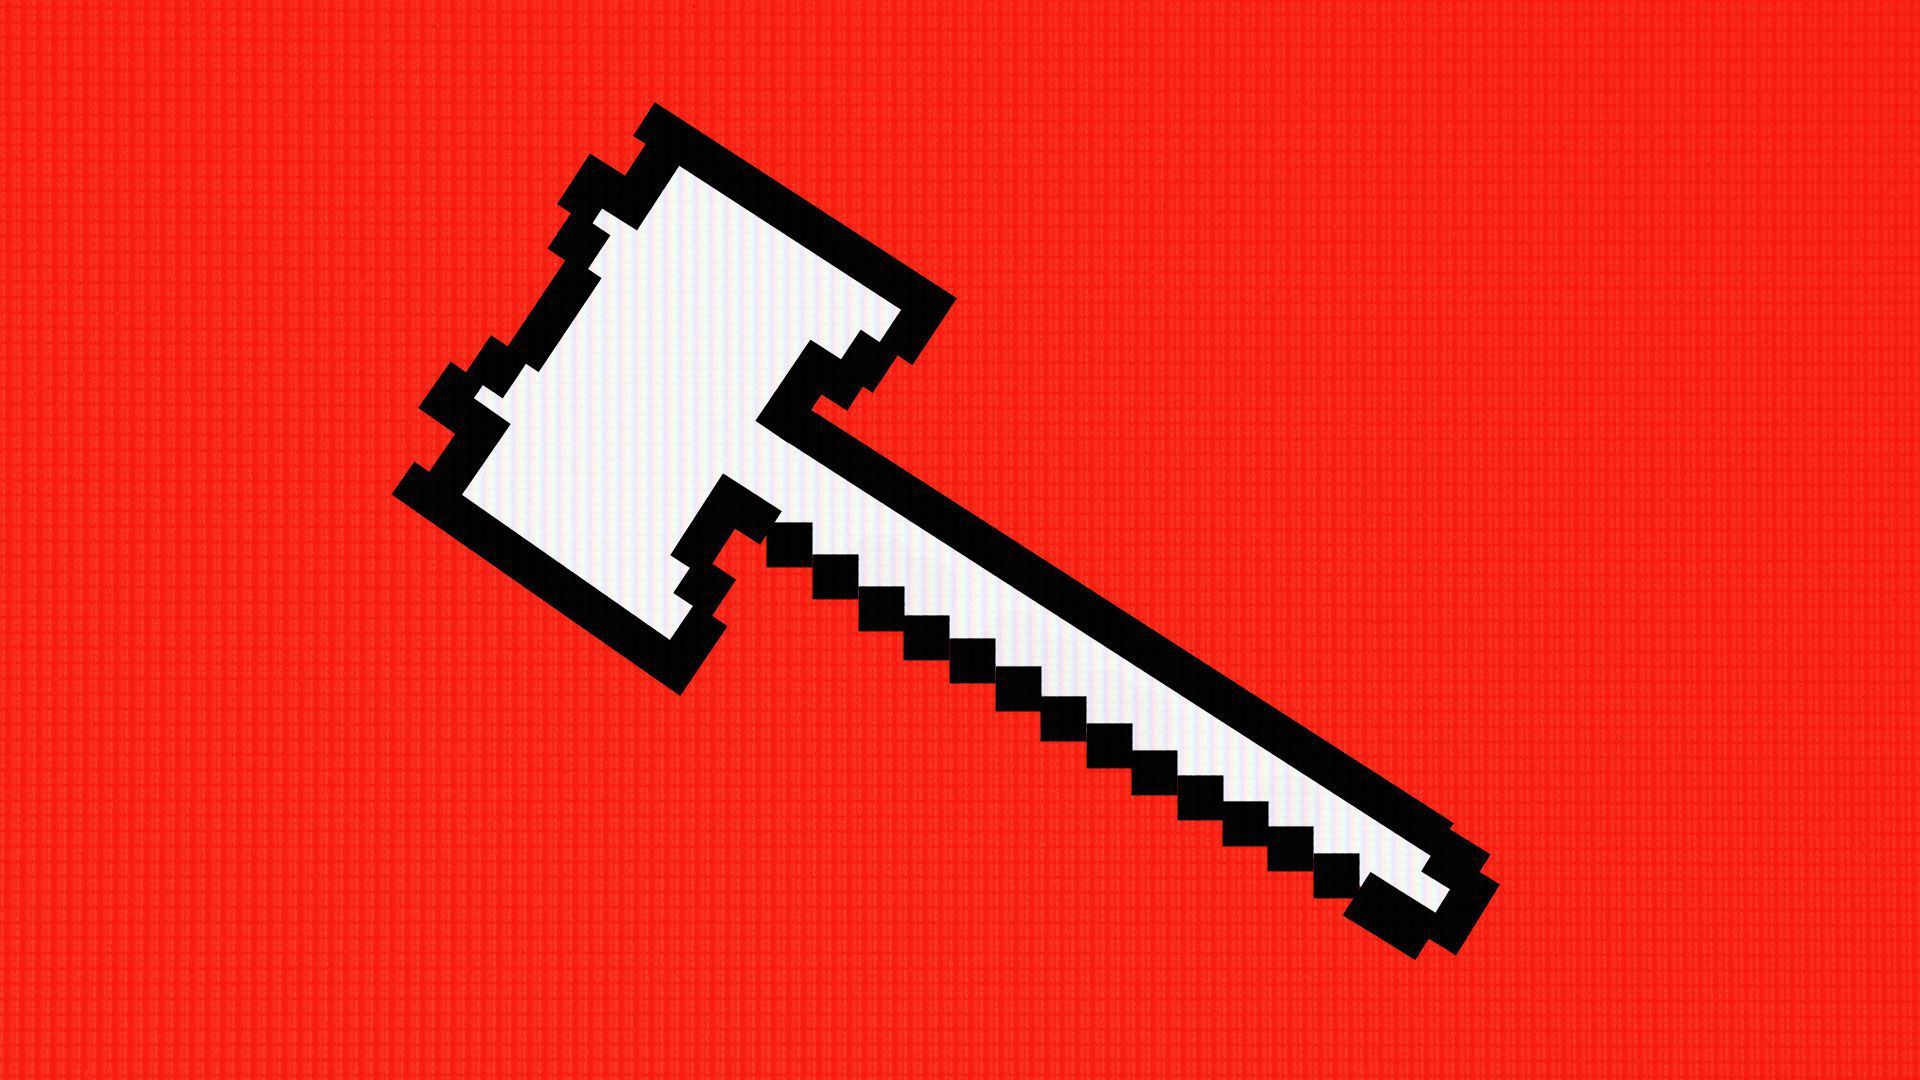 An illustration of a pixelated gavel against a red background